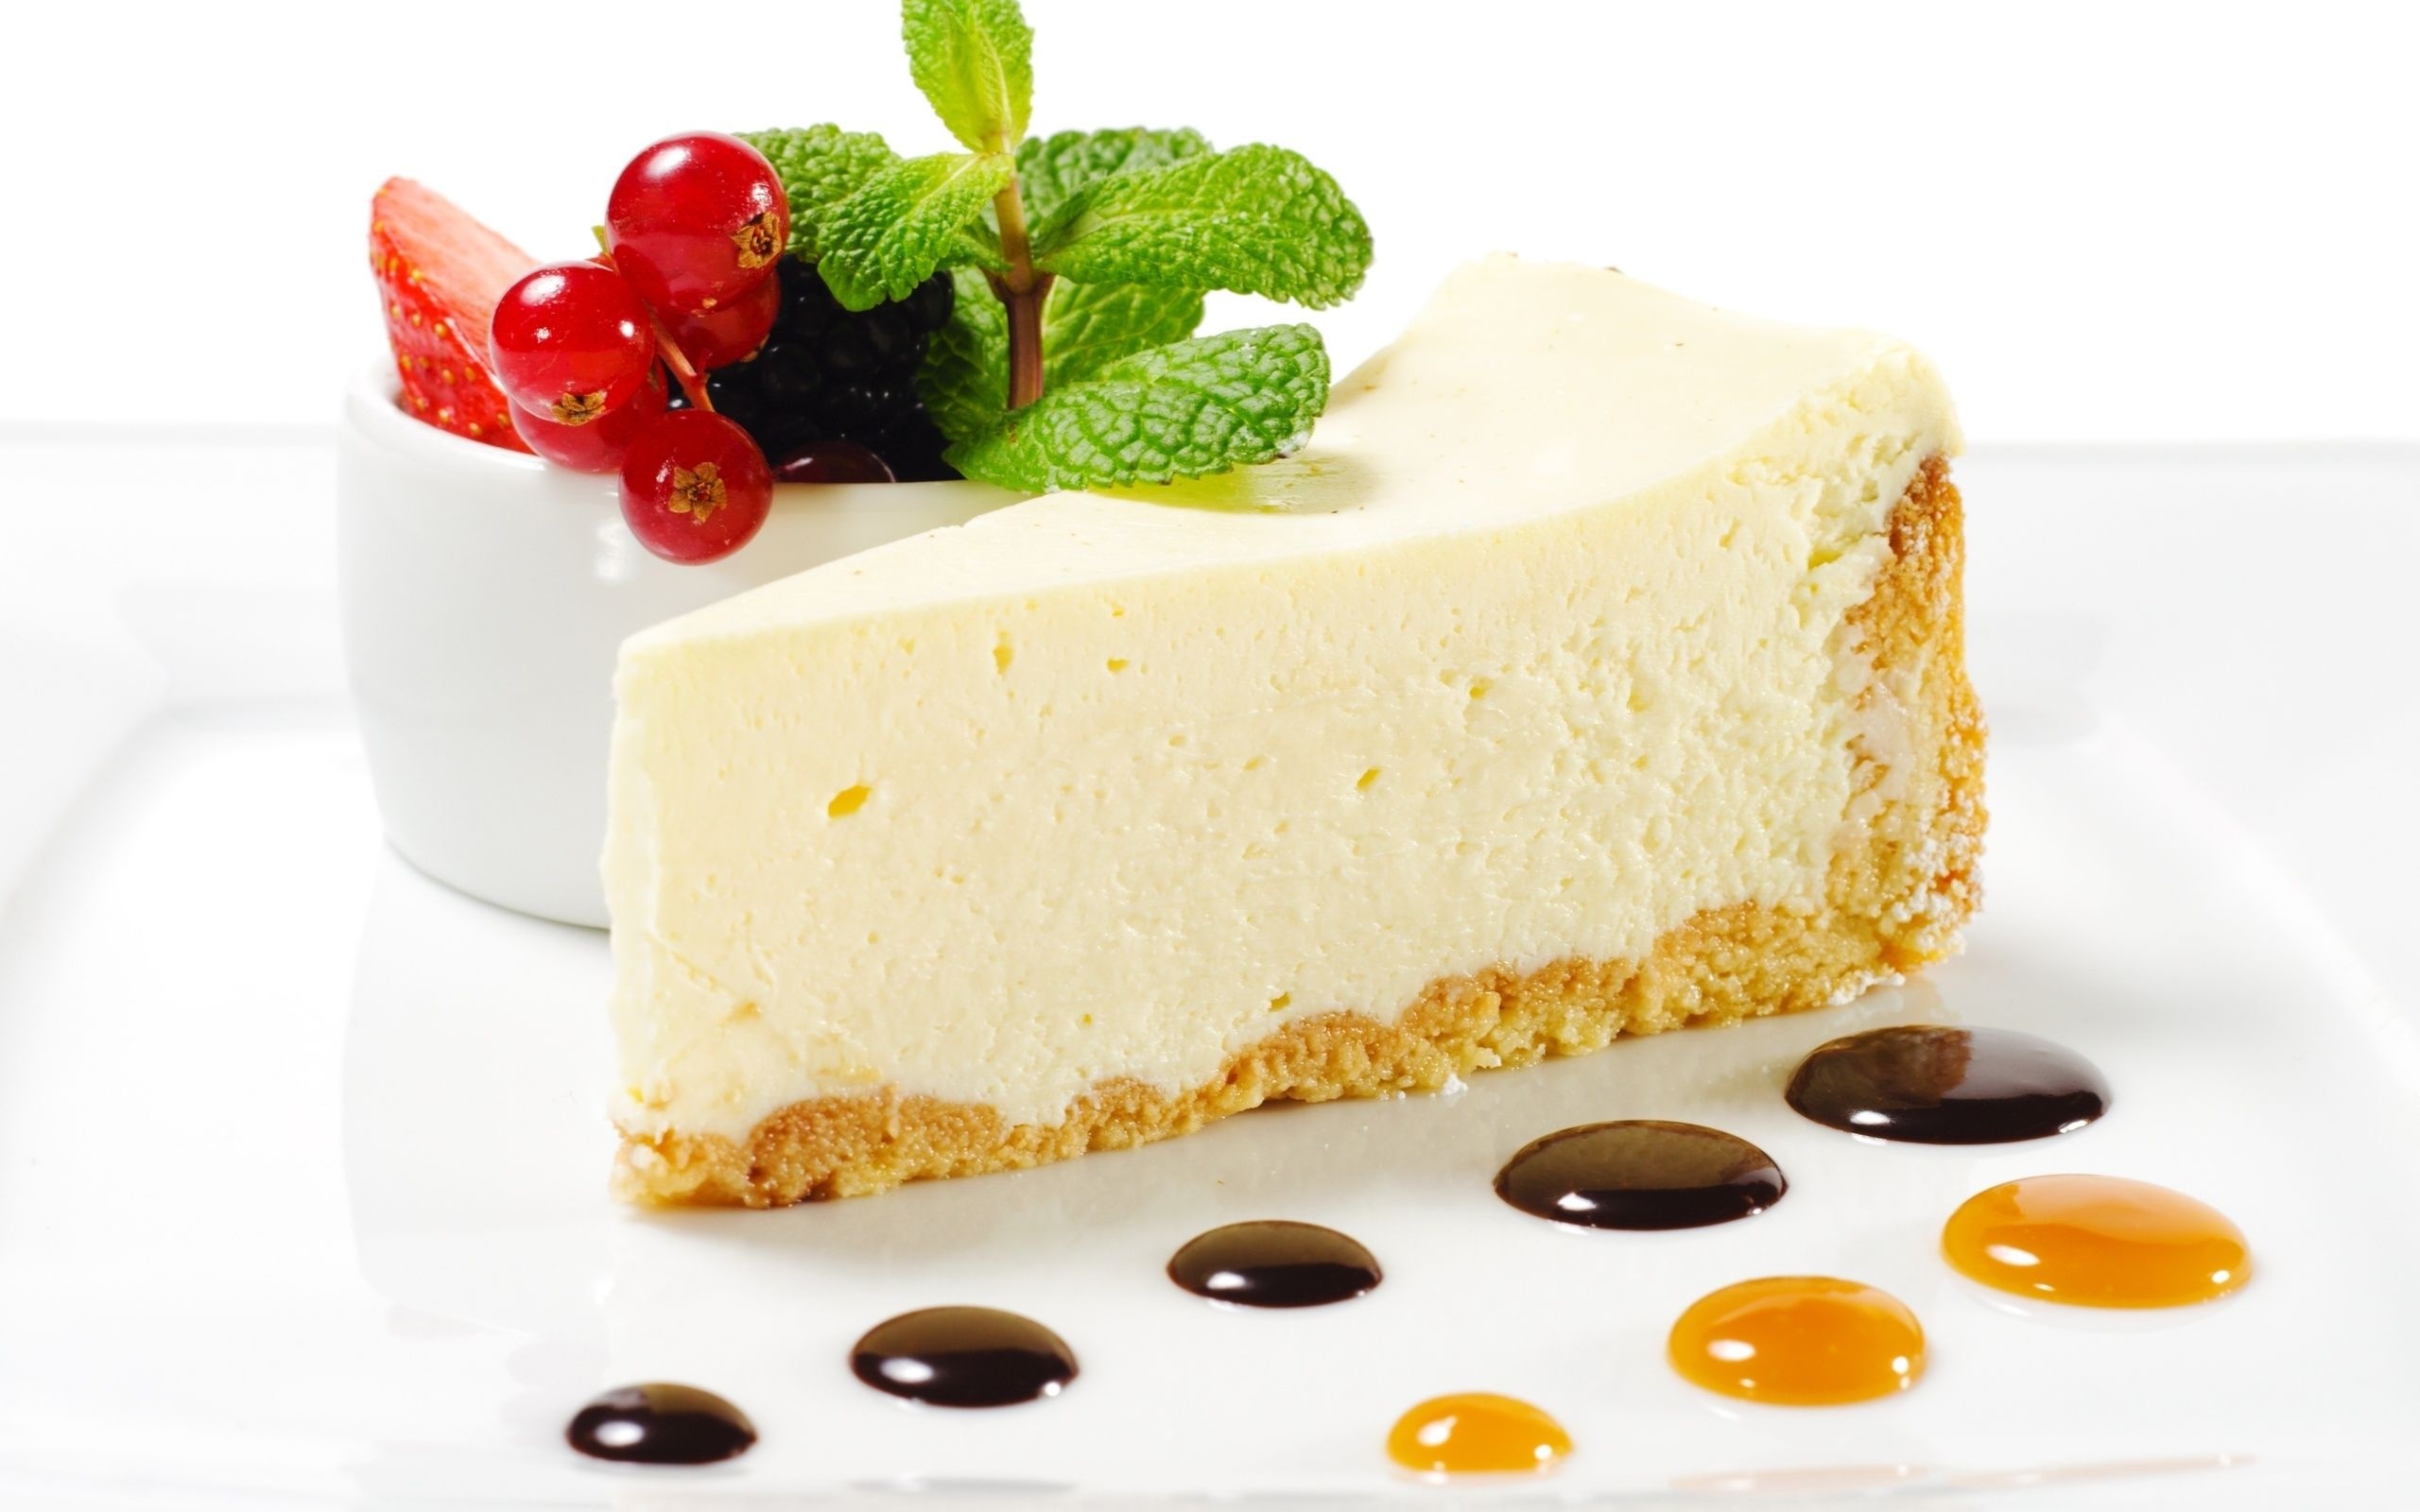 Cheesecake: Made with a crumbly crust that is often created using crushed cookies or graham cracker. 2560x1600 HD Wallpaper.